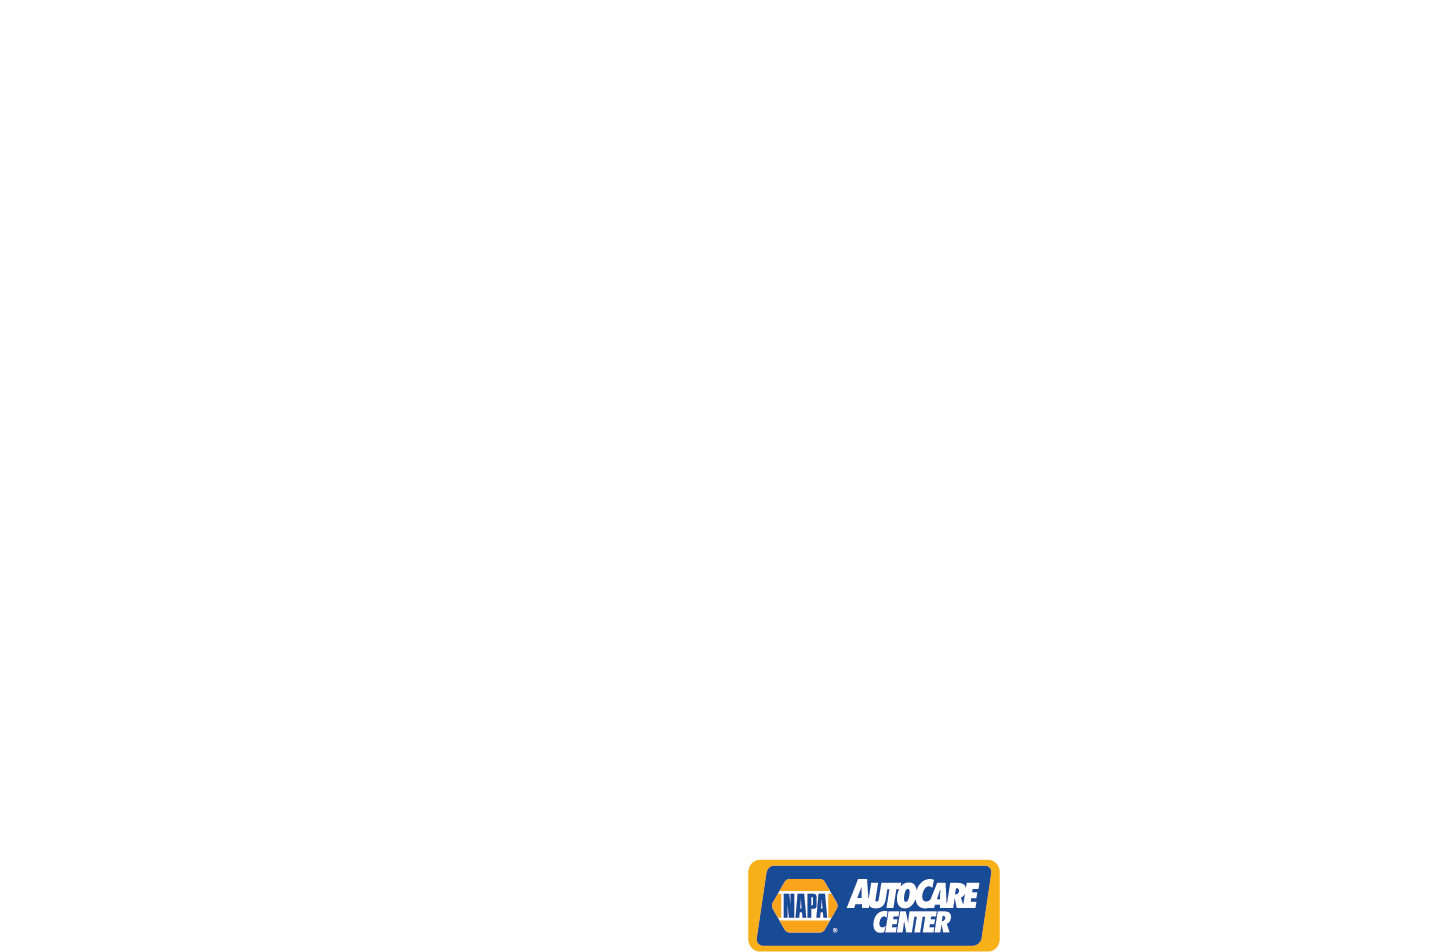 Gateway NAPA BDG in the Greater St. Louis Area